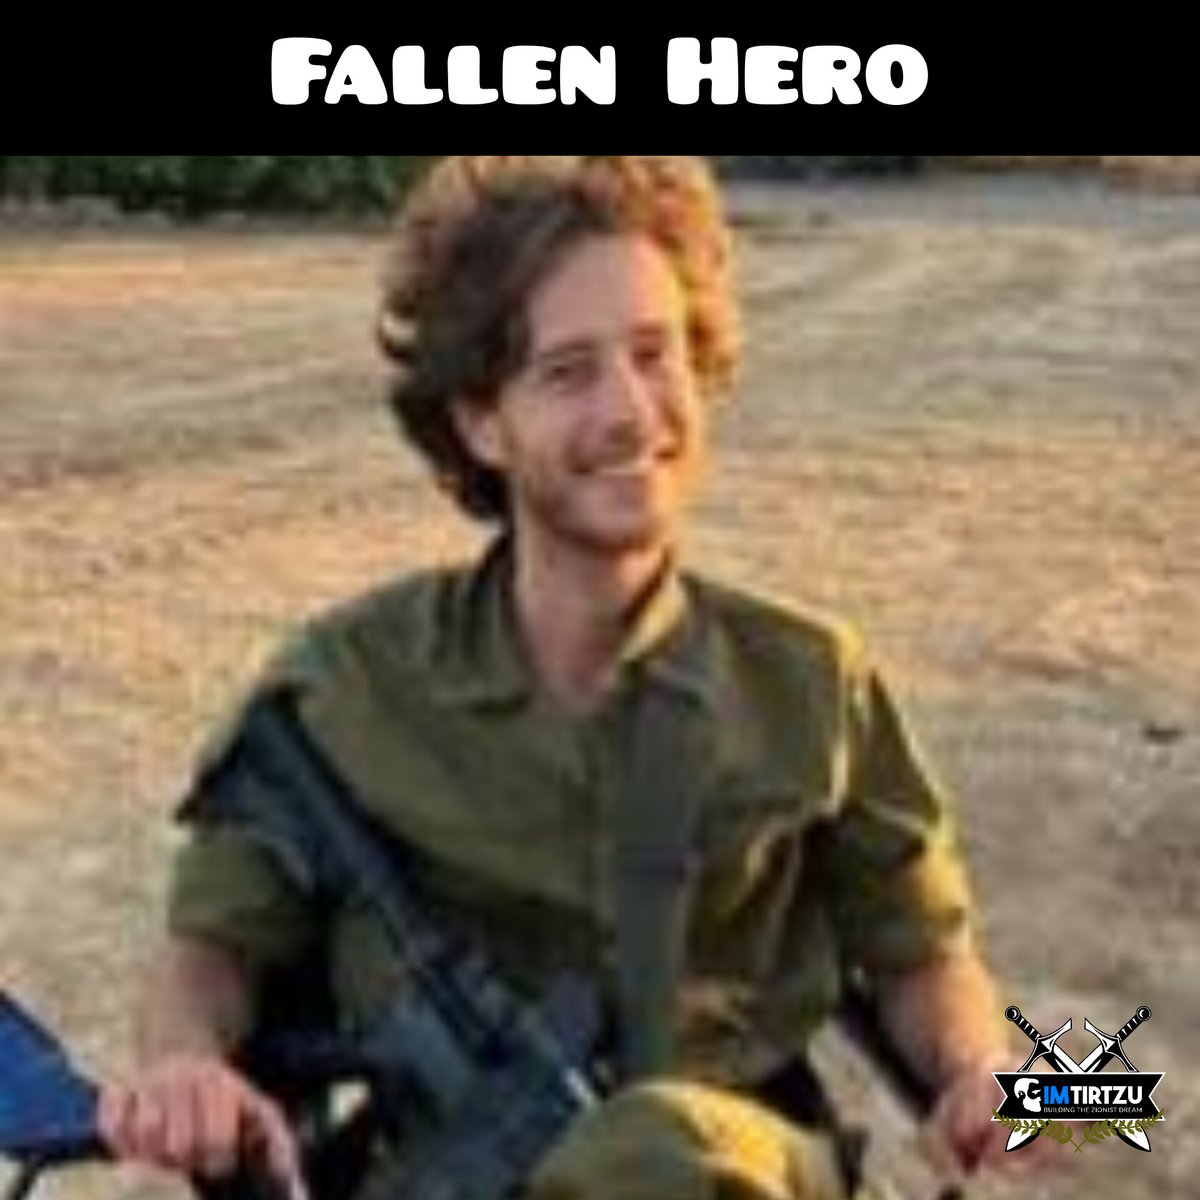 Baruch Dayan HaEmet 💔 Staff Sgt. (res.) Dan Kamkagi, 31, from Kfar HaOranim, a soldier in Reconnaissance Battalion 6551, Half Fire Brigade (551), fell during an operational activity in northern Israel. May his memory be a blessing 💔